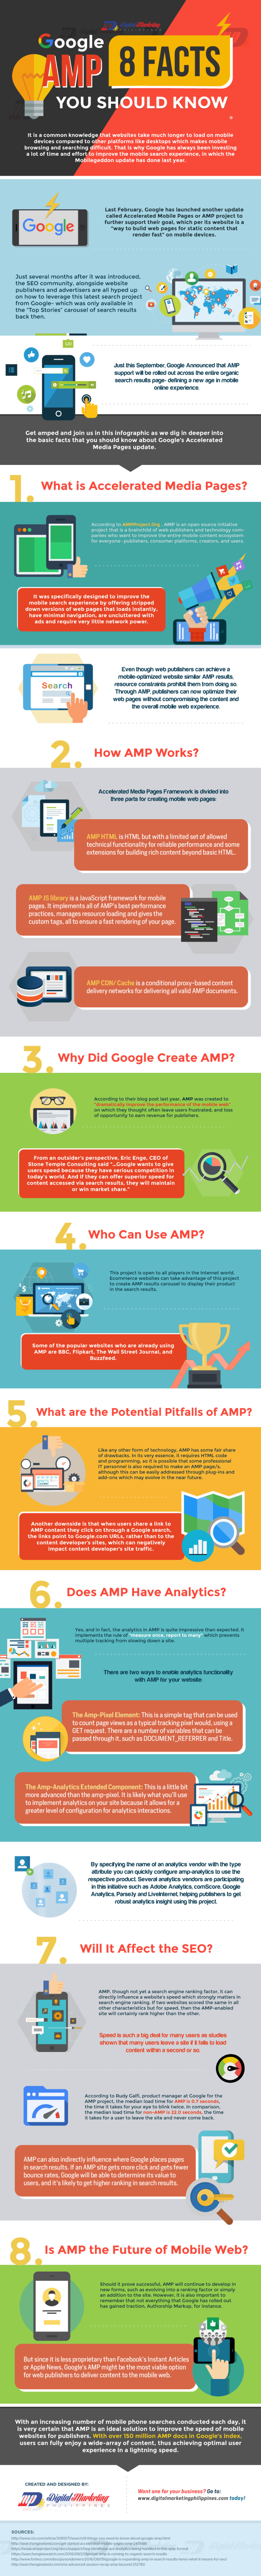 Google AMP- 8 Facts You Should Know  - Digital Marketing Philippines | The MarTech Digest | Scoop.it